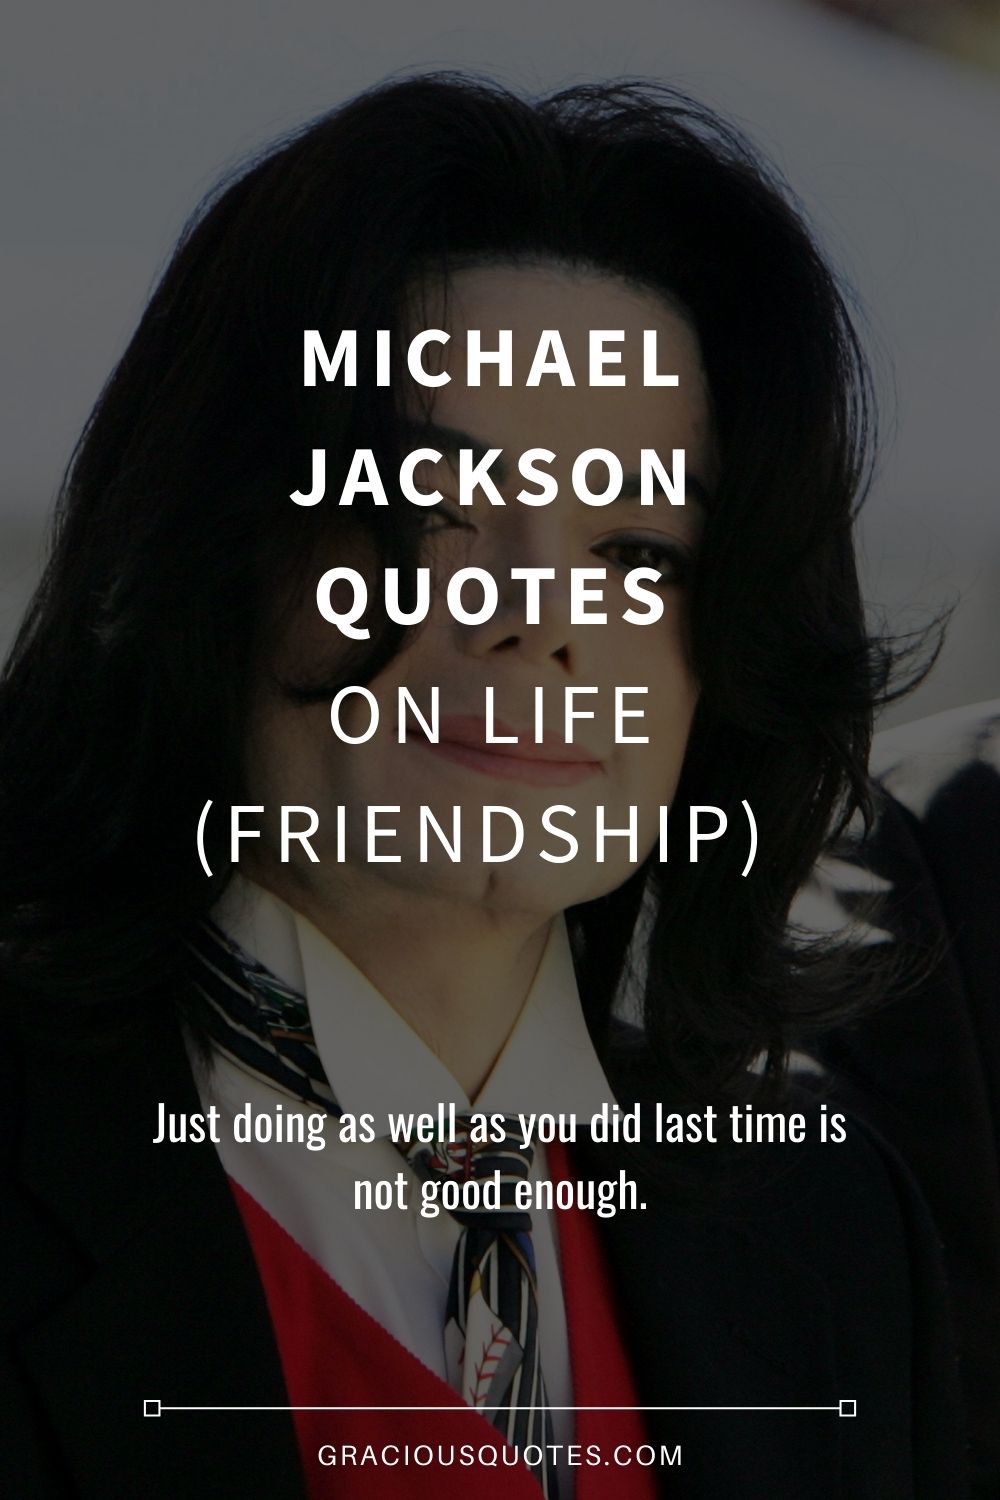 Michael Jackson Quotes on Life (FRIENDSHIP) - Gracious Quotes